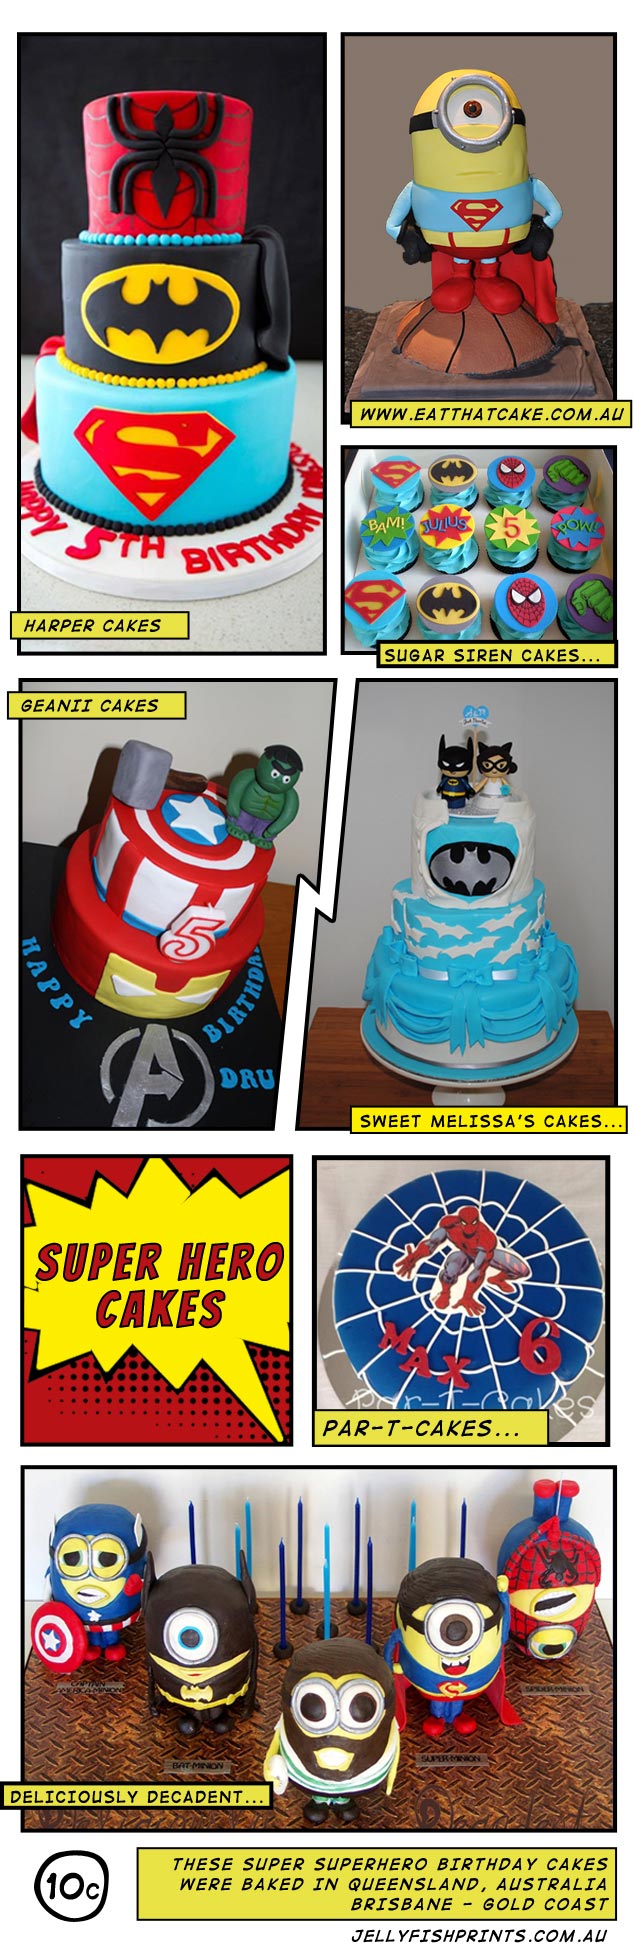 Awesome birthday superheroes cakes and a cool batman wedding cake from Queensland.